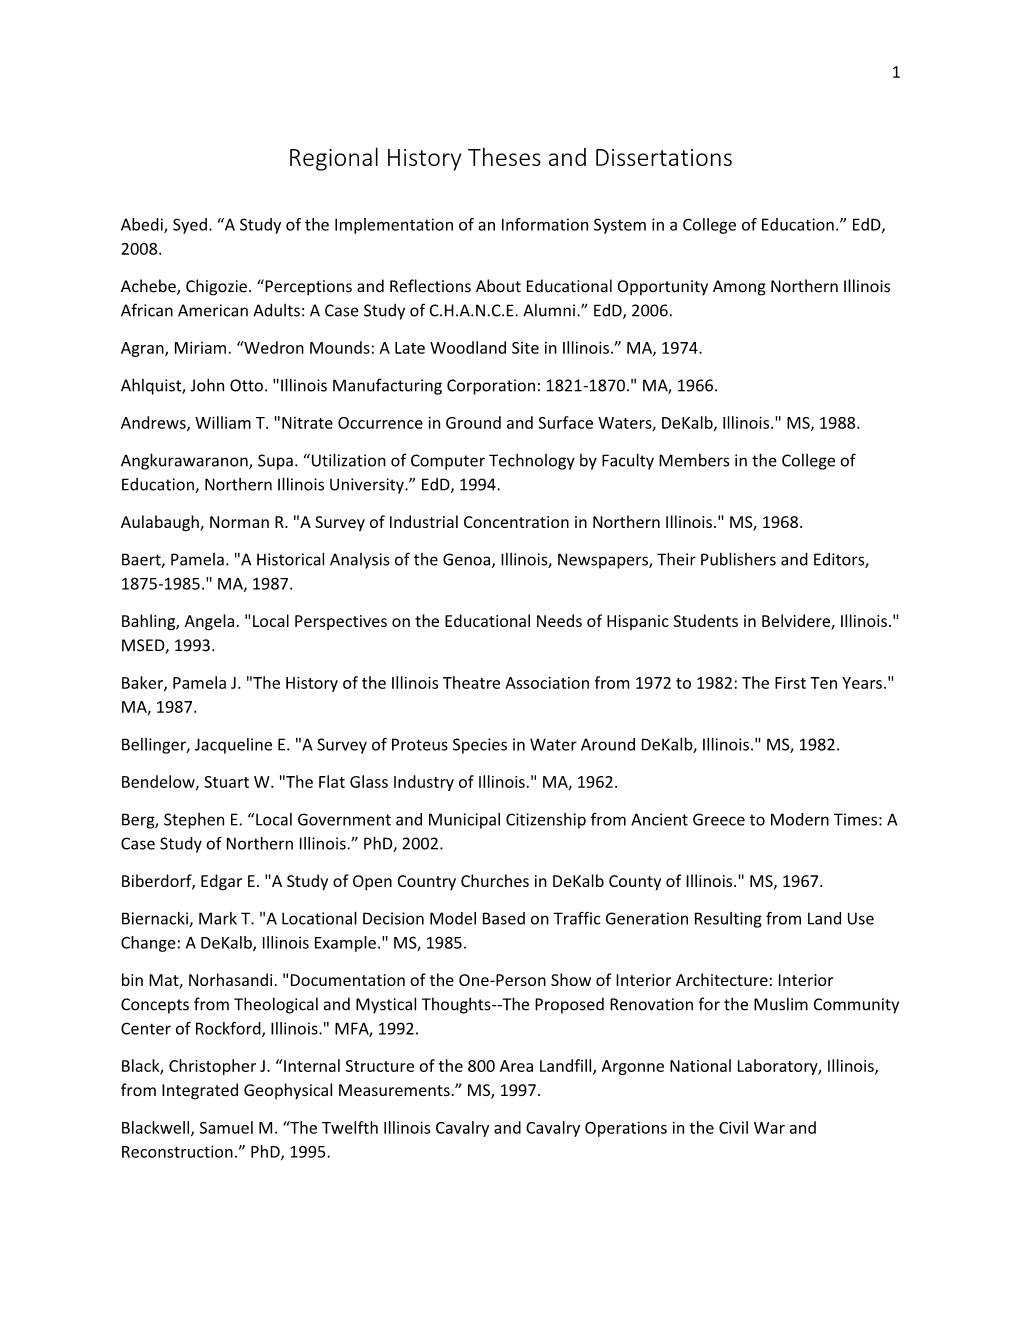 Regional History Theses and Dissertations